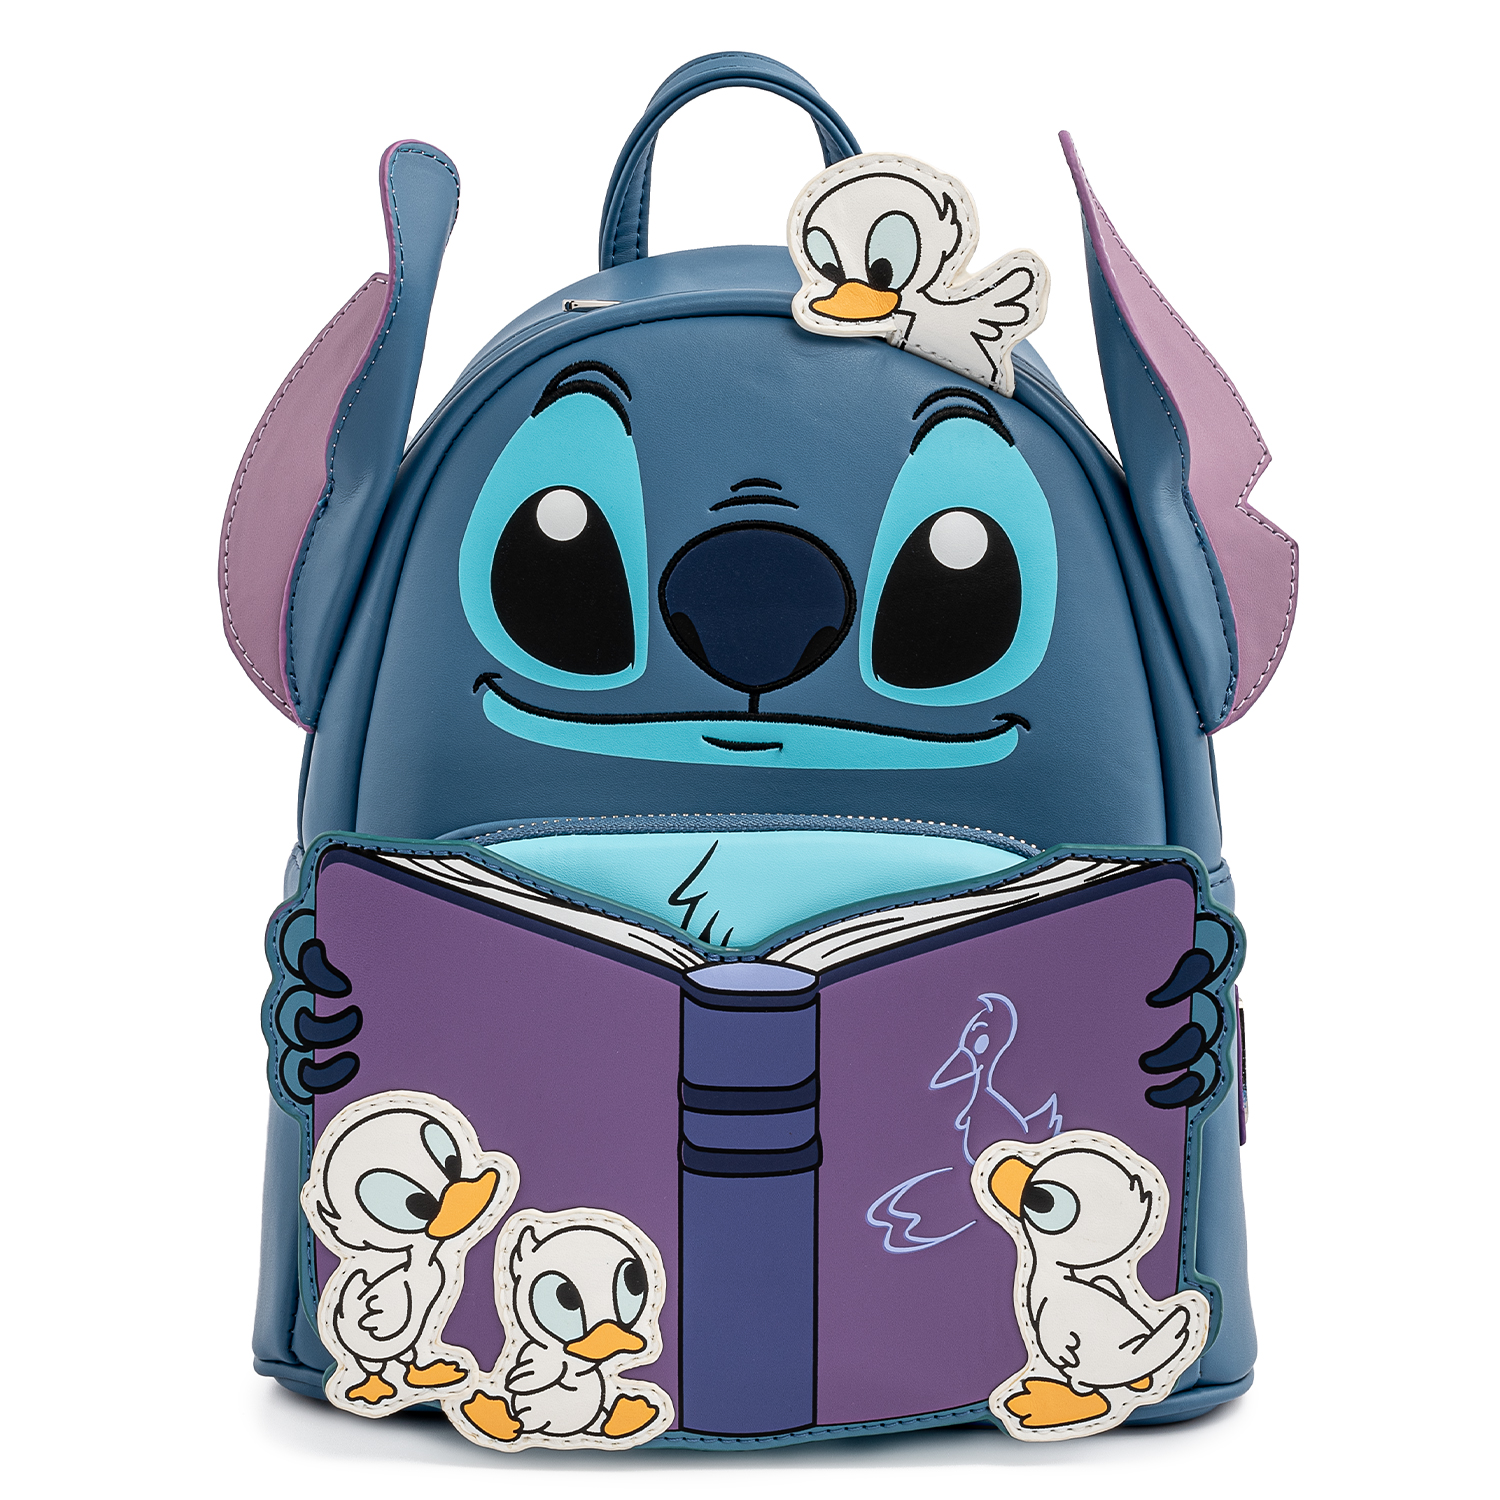 Details about   LOUNGEFLY STITCH WATER DUCKLINGS MINI BACKPACK NEW WITH TAGS